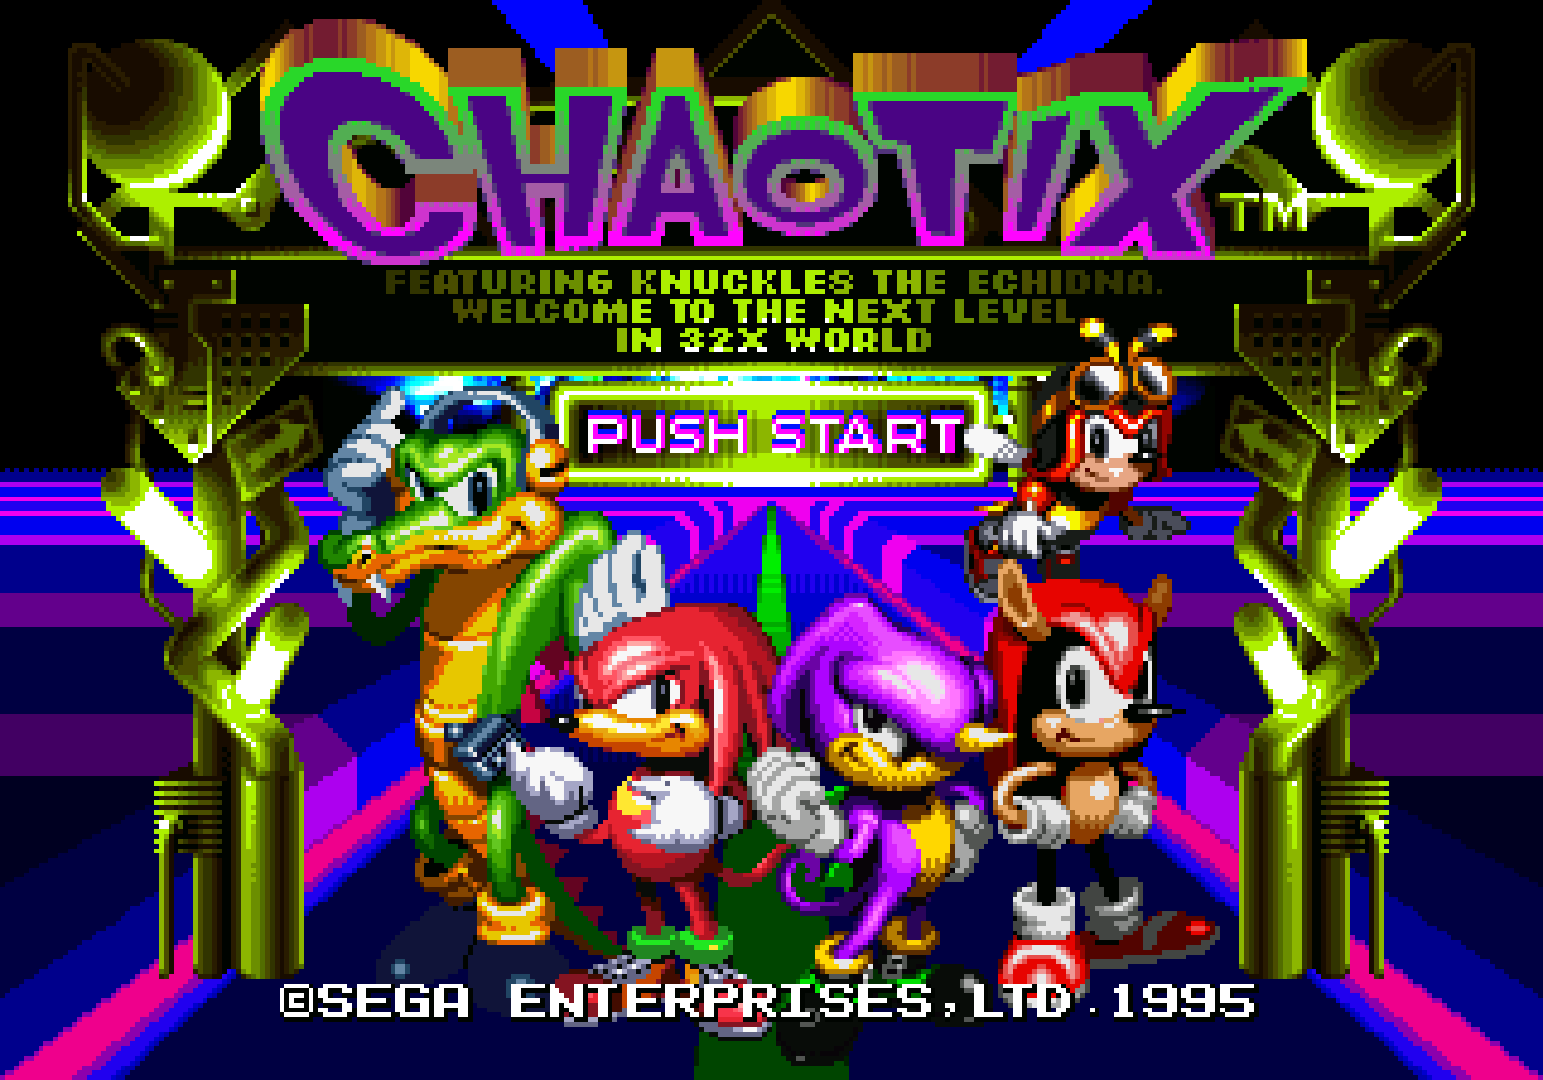 download knuckles chaotix 2